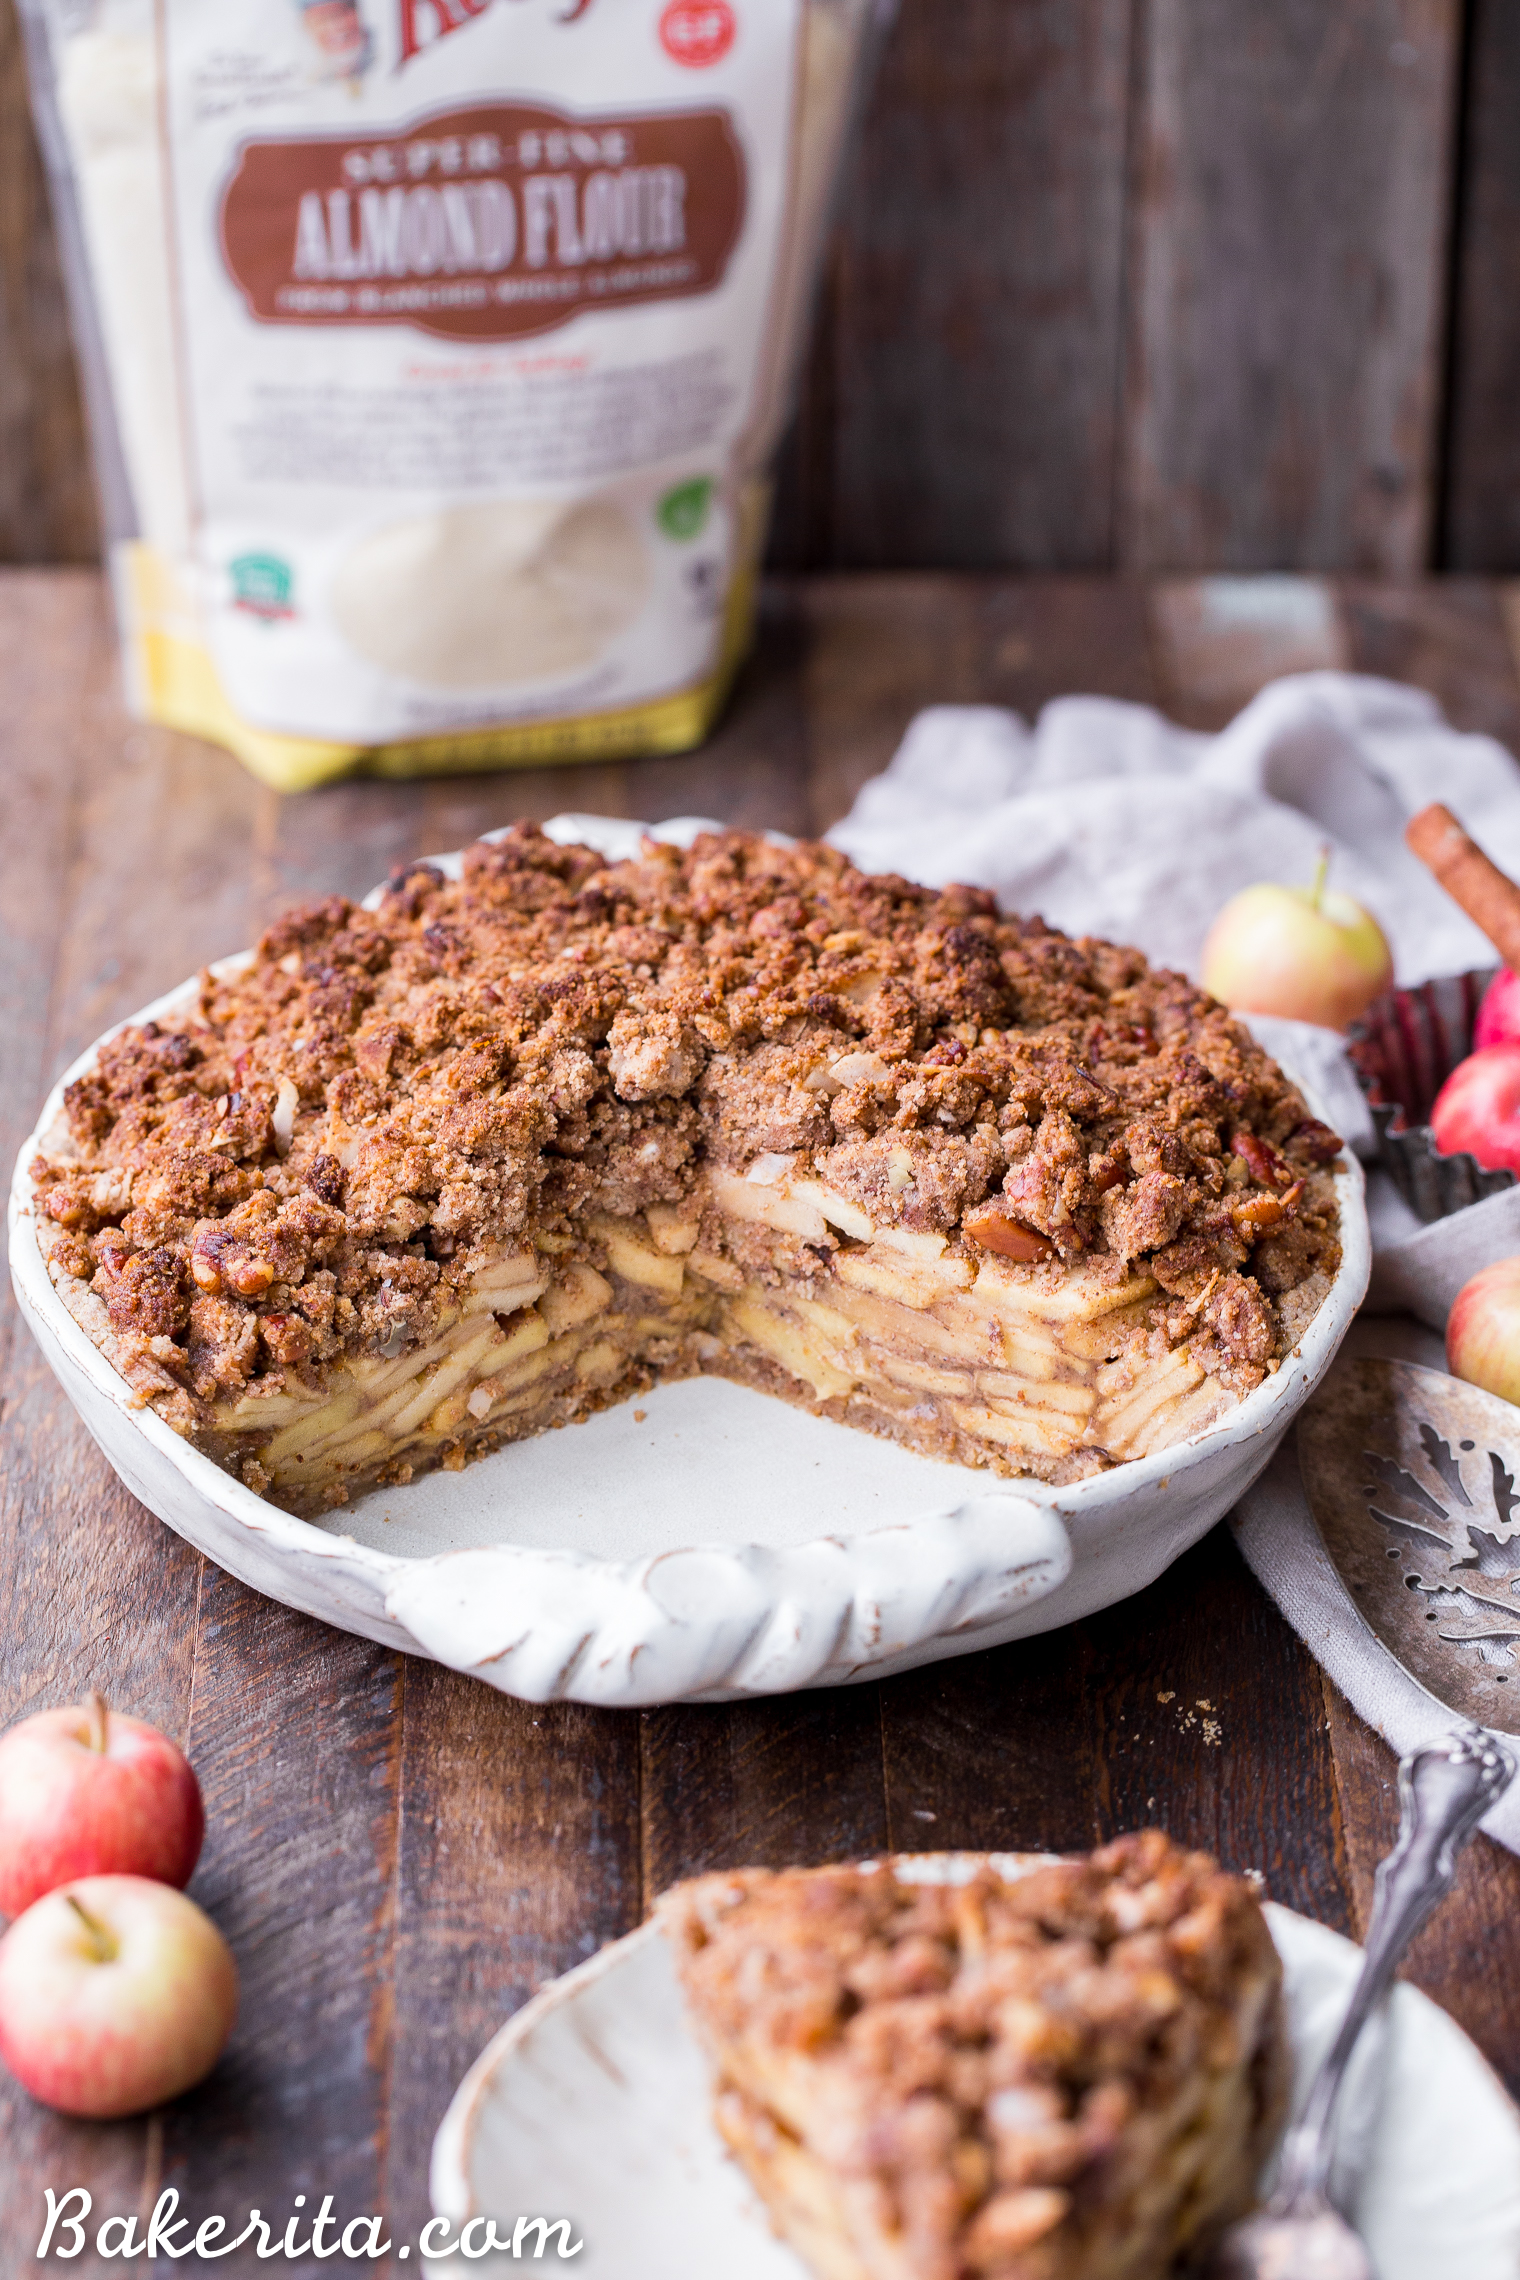 This Apple Crumble Pie is so delicious it's bound to be a holiday dessert staple! This gluten free, paleo + vegan pie is filled with soft, caramelized apples and topped with a nutty, crunchy paleo crumble topping.